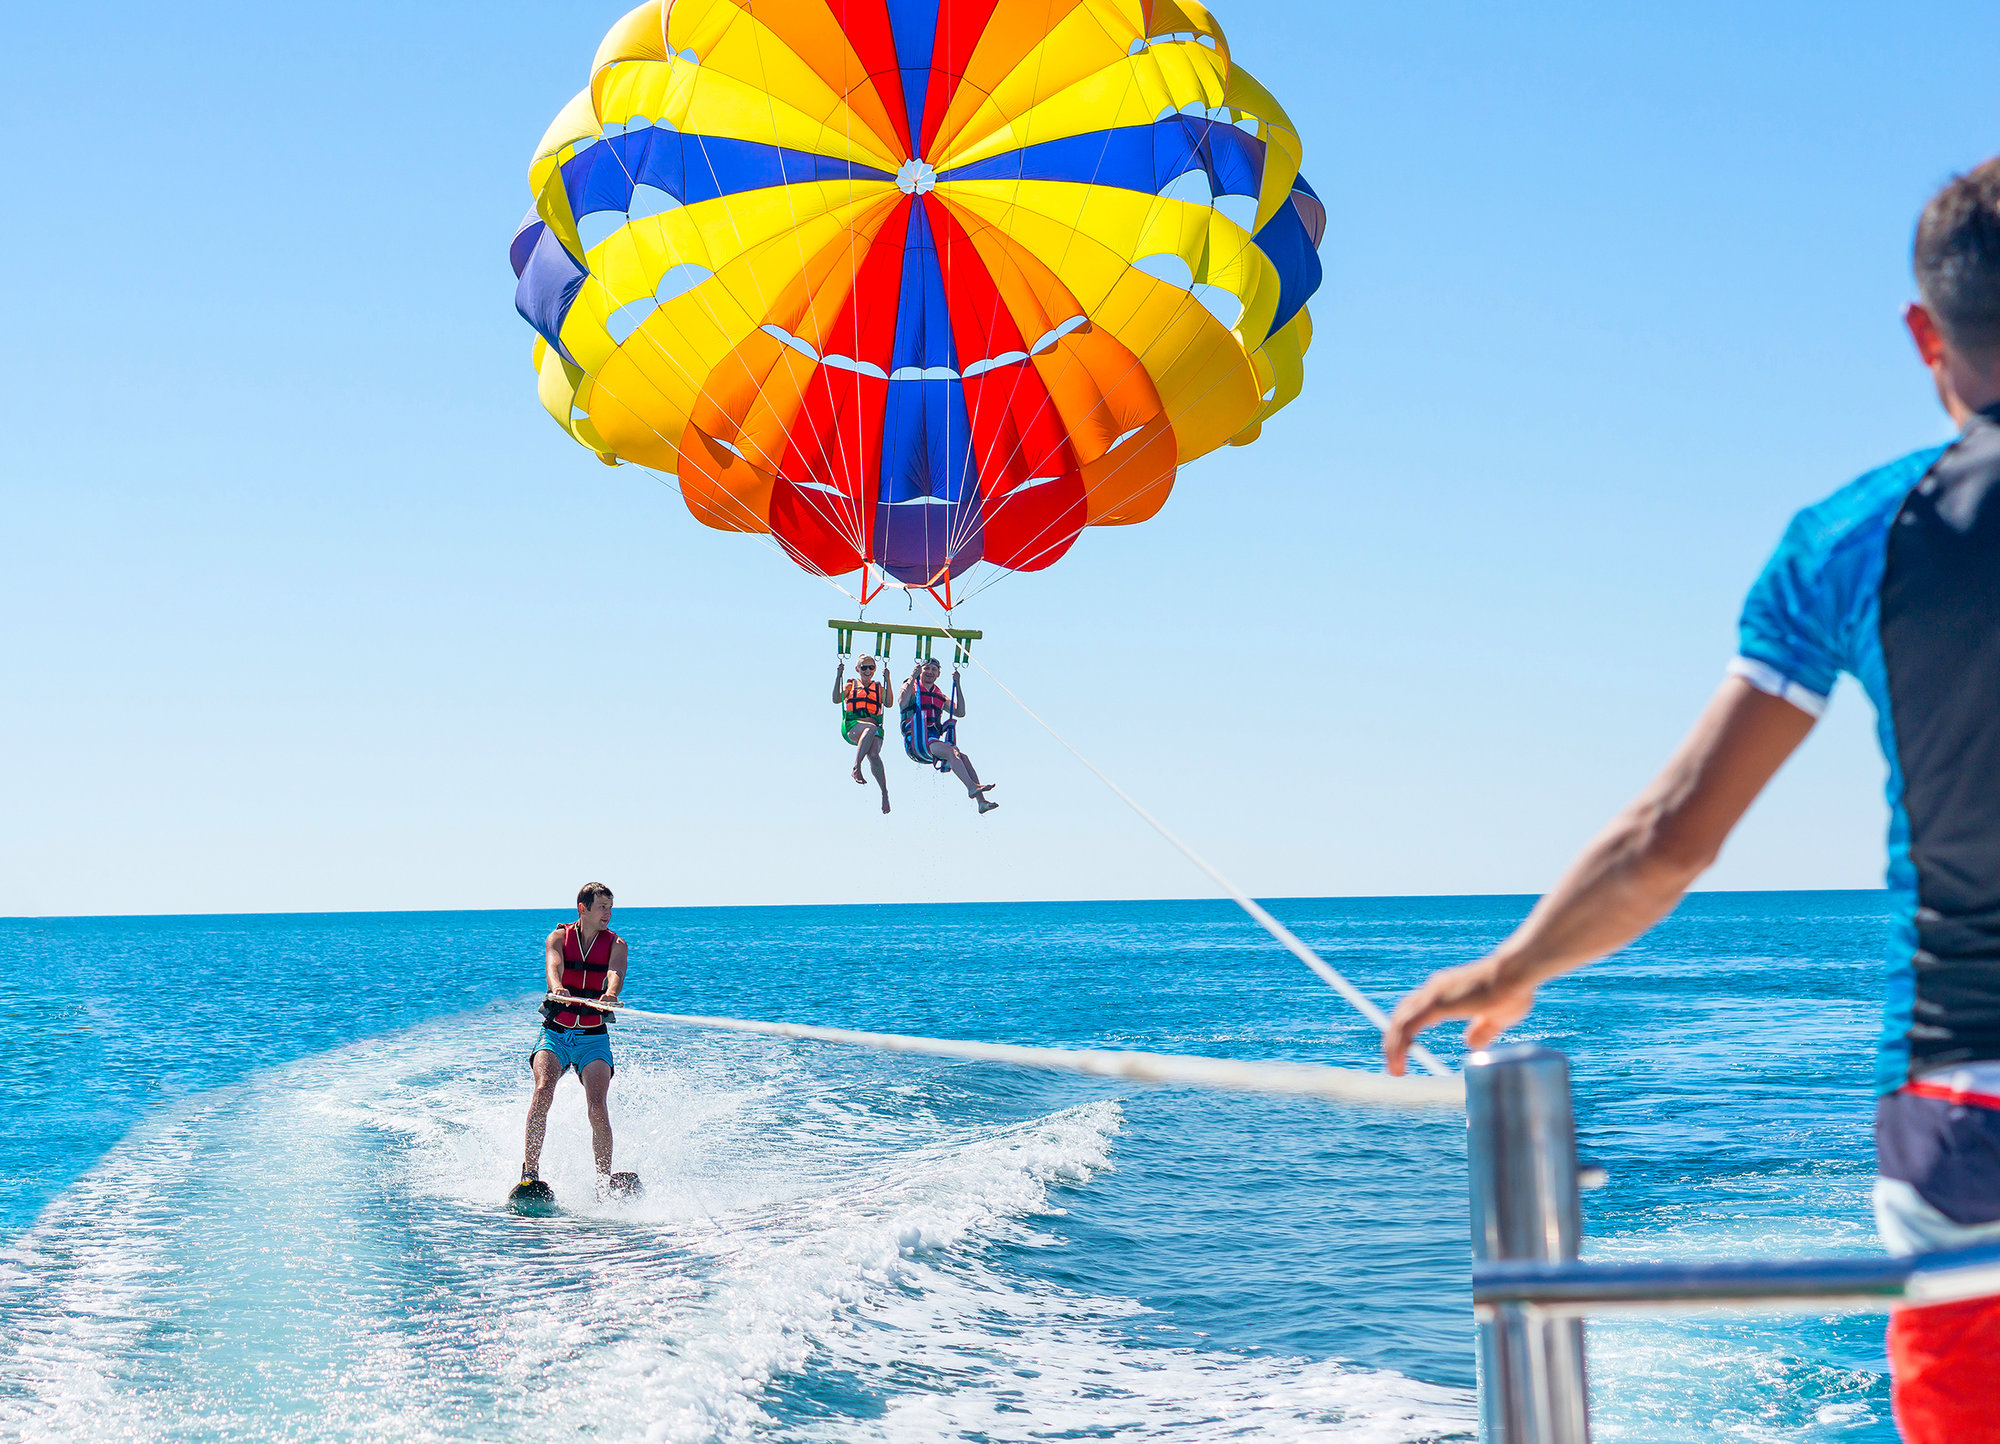 PARASAIL OR WHALE WATCH